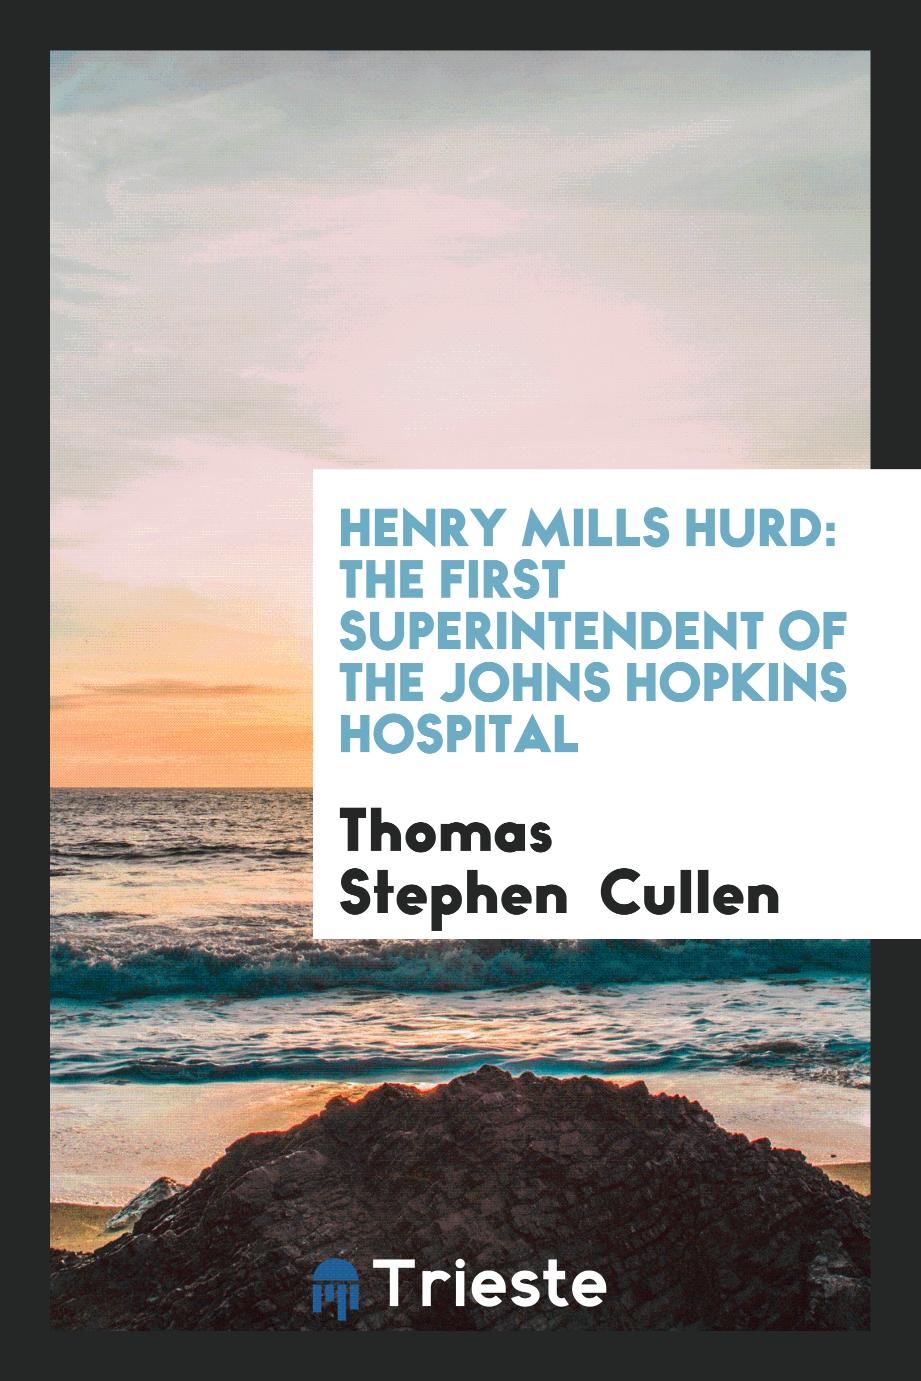 Henry Mills Hurd: The First Superintendent of the Johns Hopkins Hospital